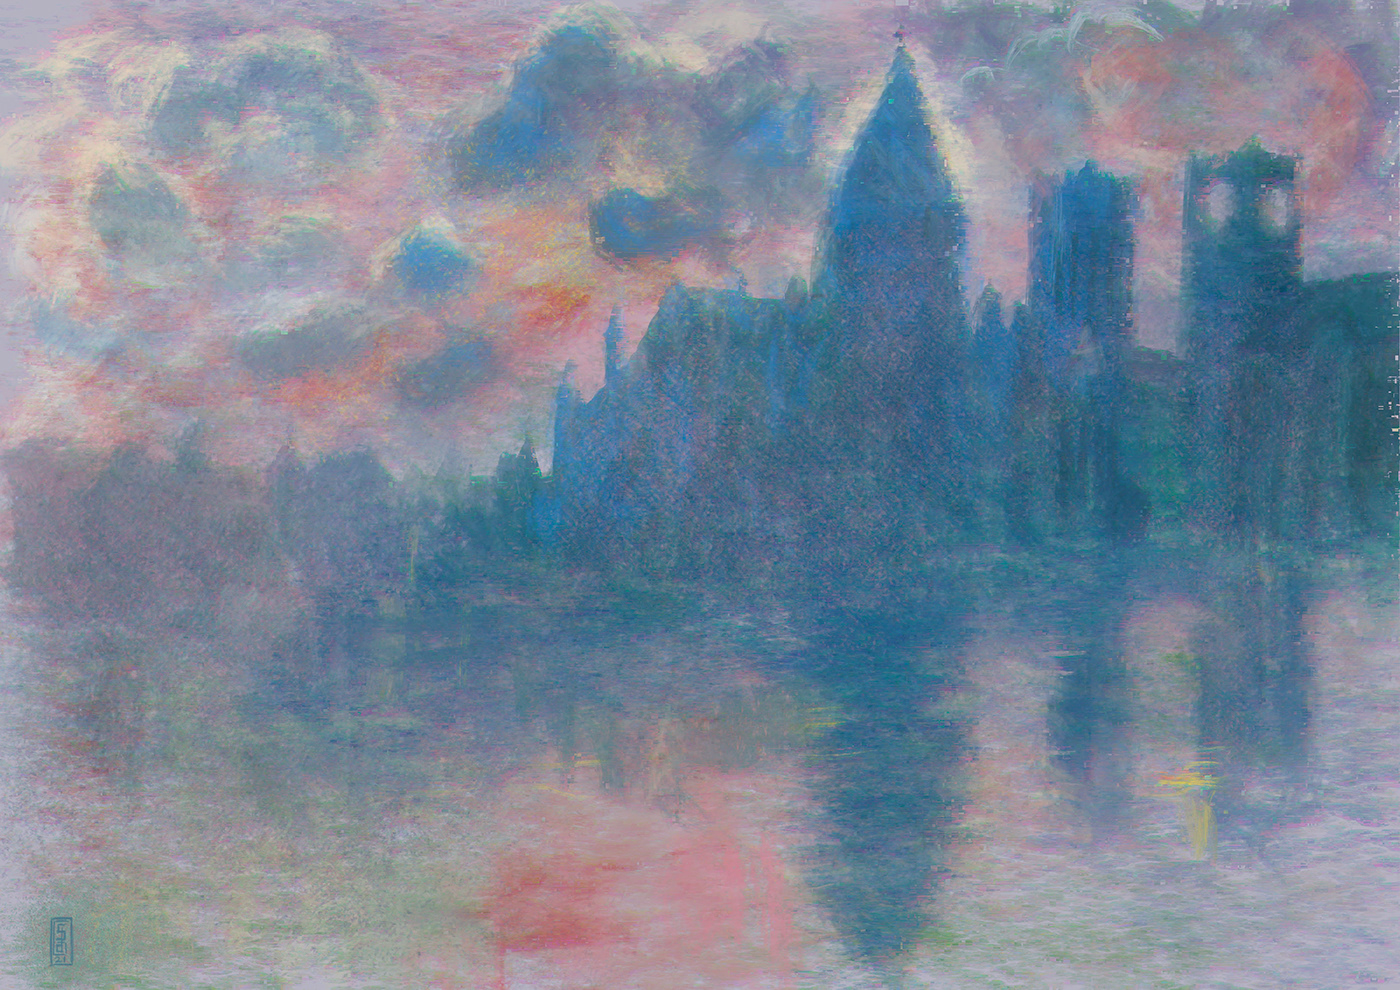 Painting of Cathedral Said Bavo in Haarlem,the Netherlands. Inspired by Claude Monet.